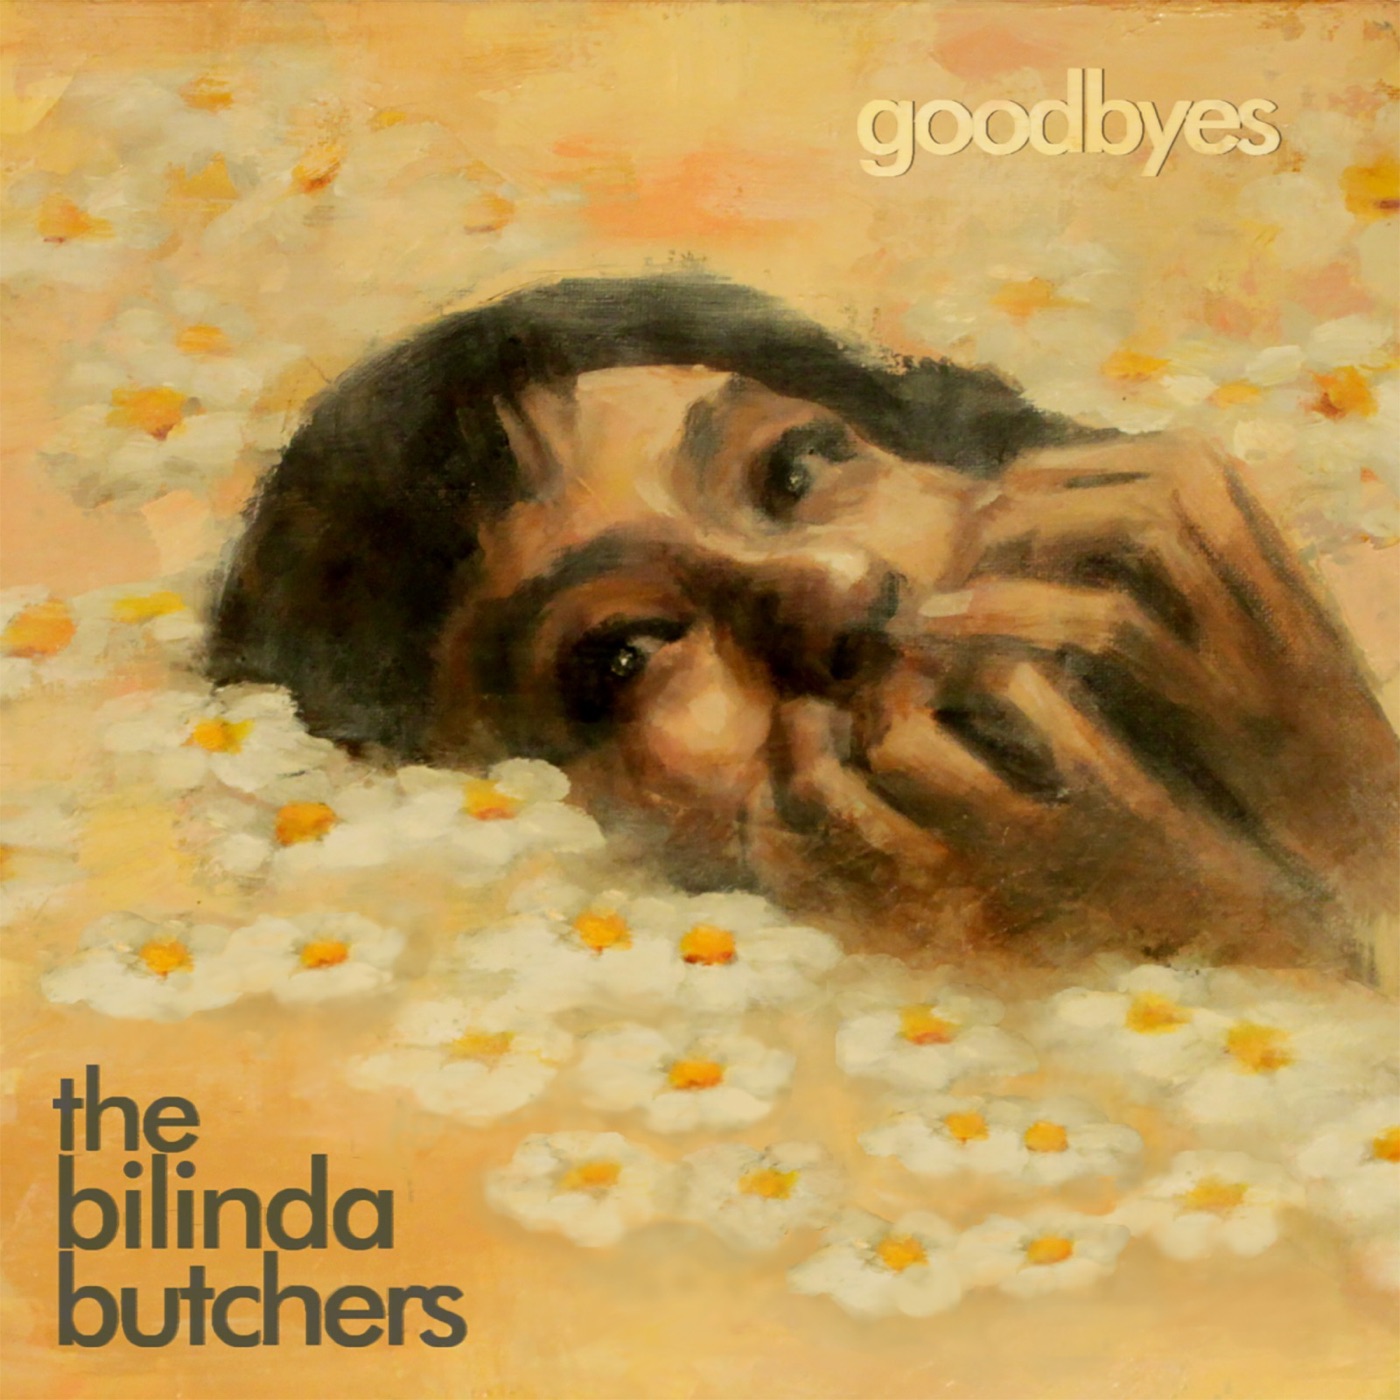 Goodbyes by The Bilinda Butchers